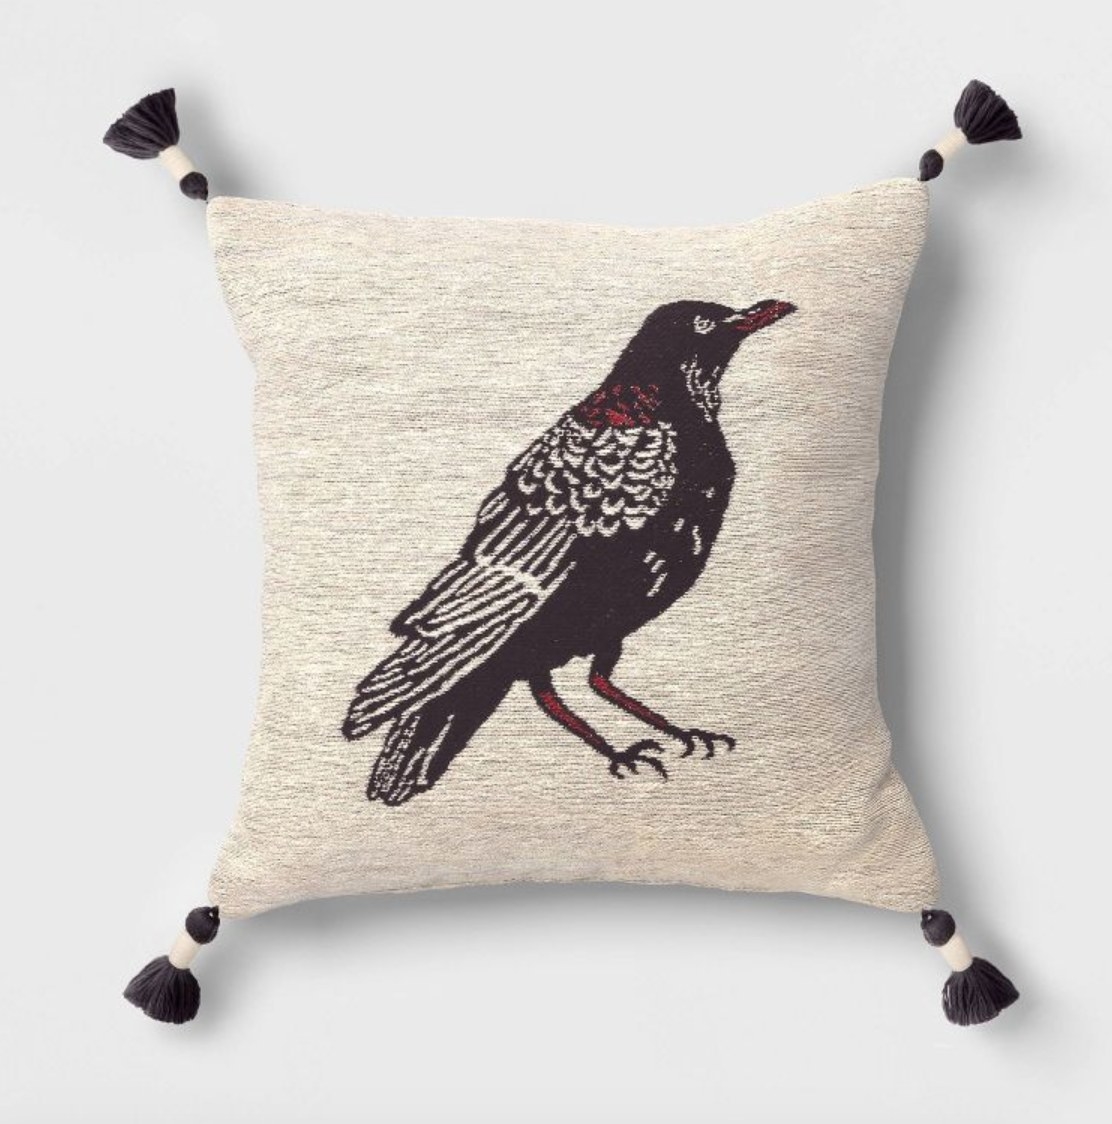 the throw pillow with a raven on it